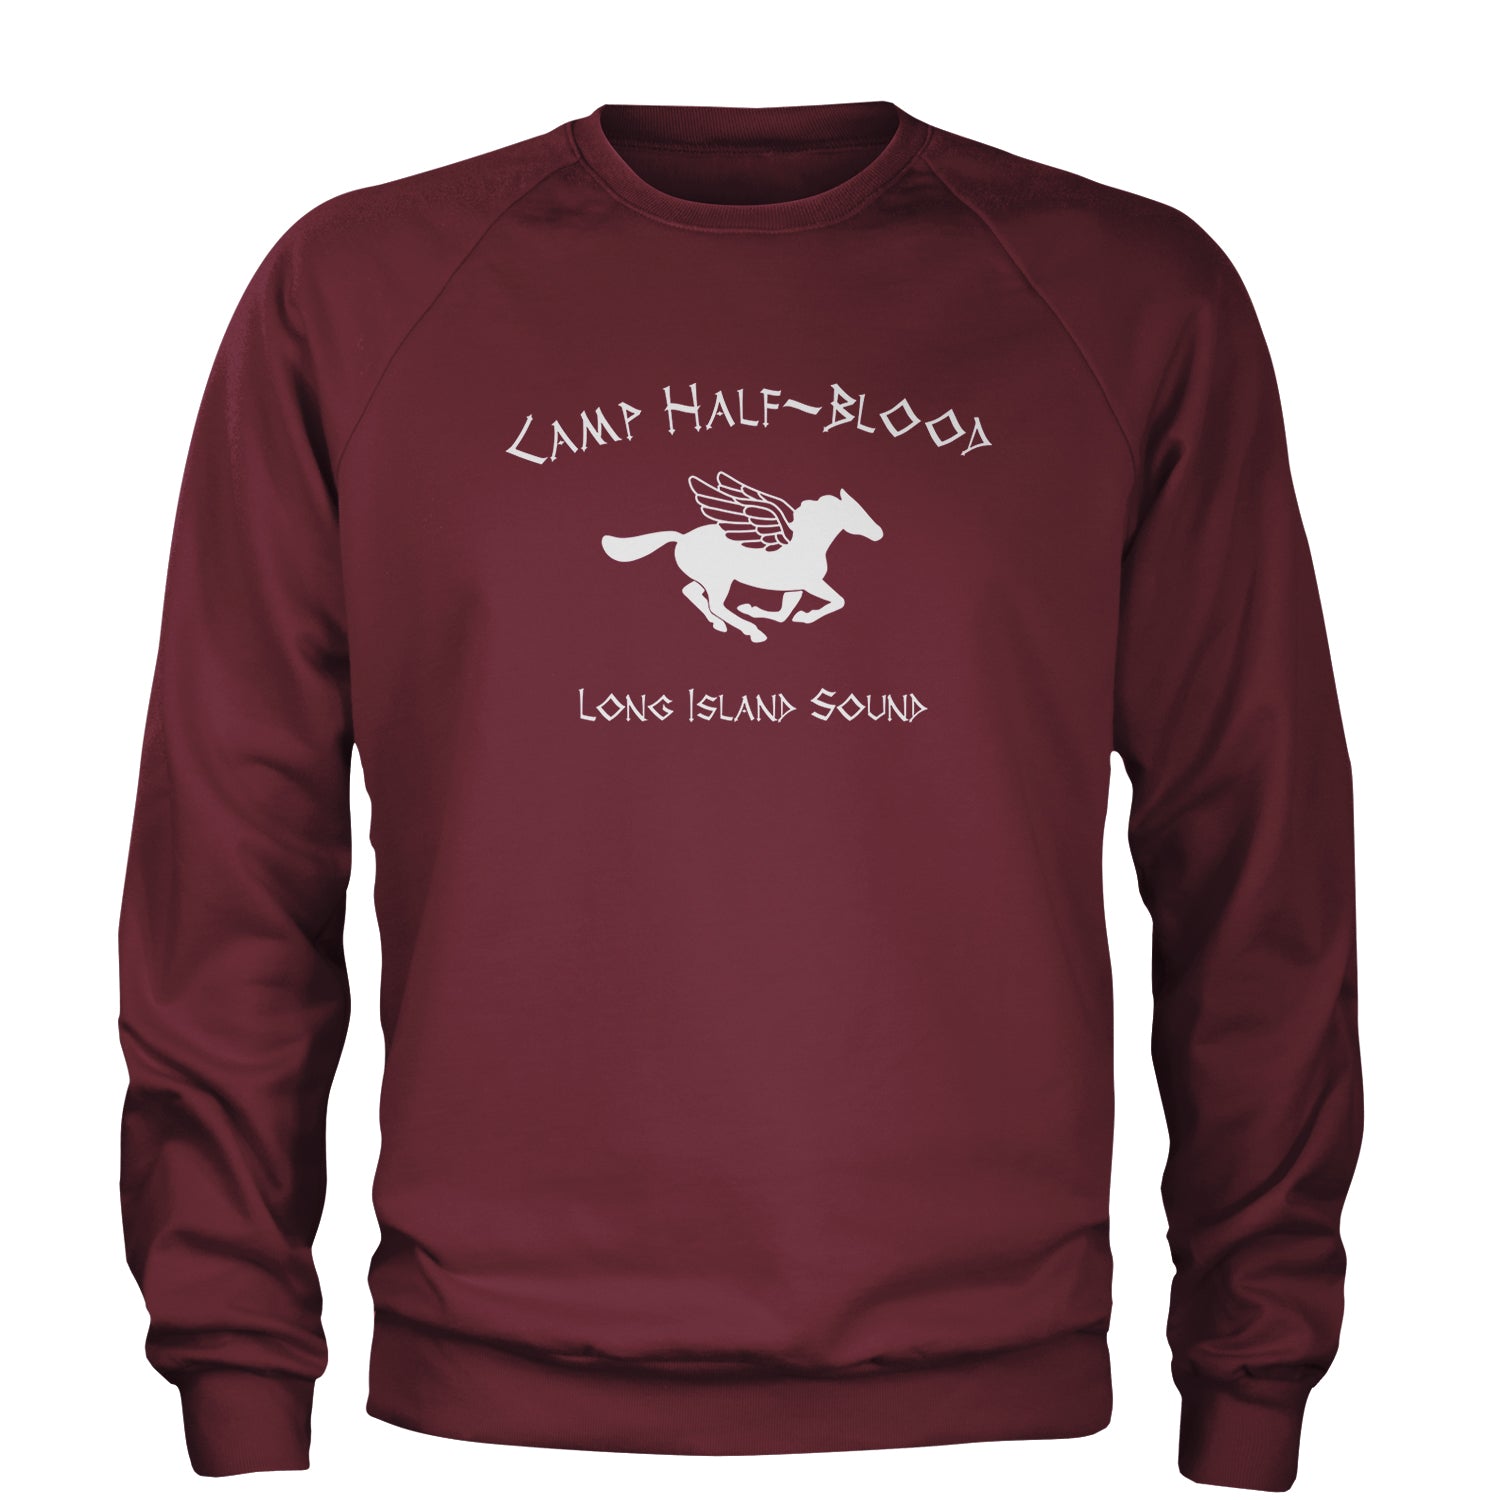 Camp Half Blood Long Island Sound Adult Crewneck Sweatshirt and, apollo, blood, camp, half, jackson, jupiter, olympians, percy, the by Expression Tees